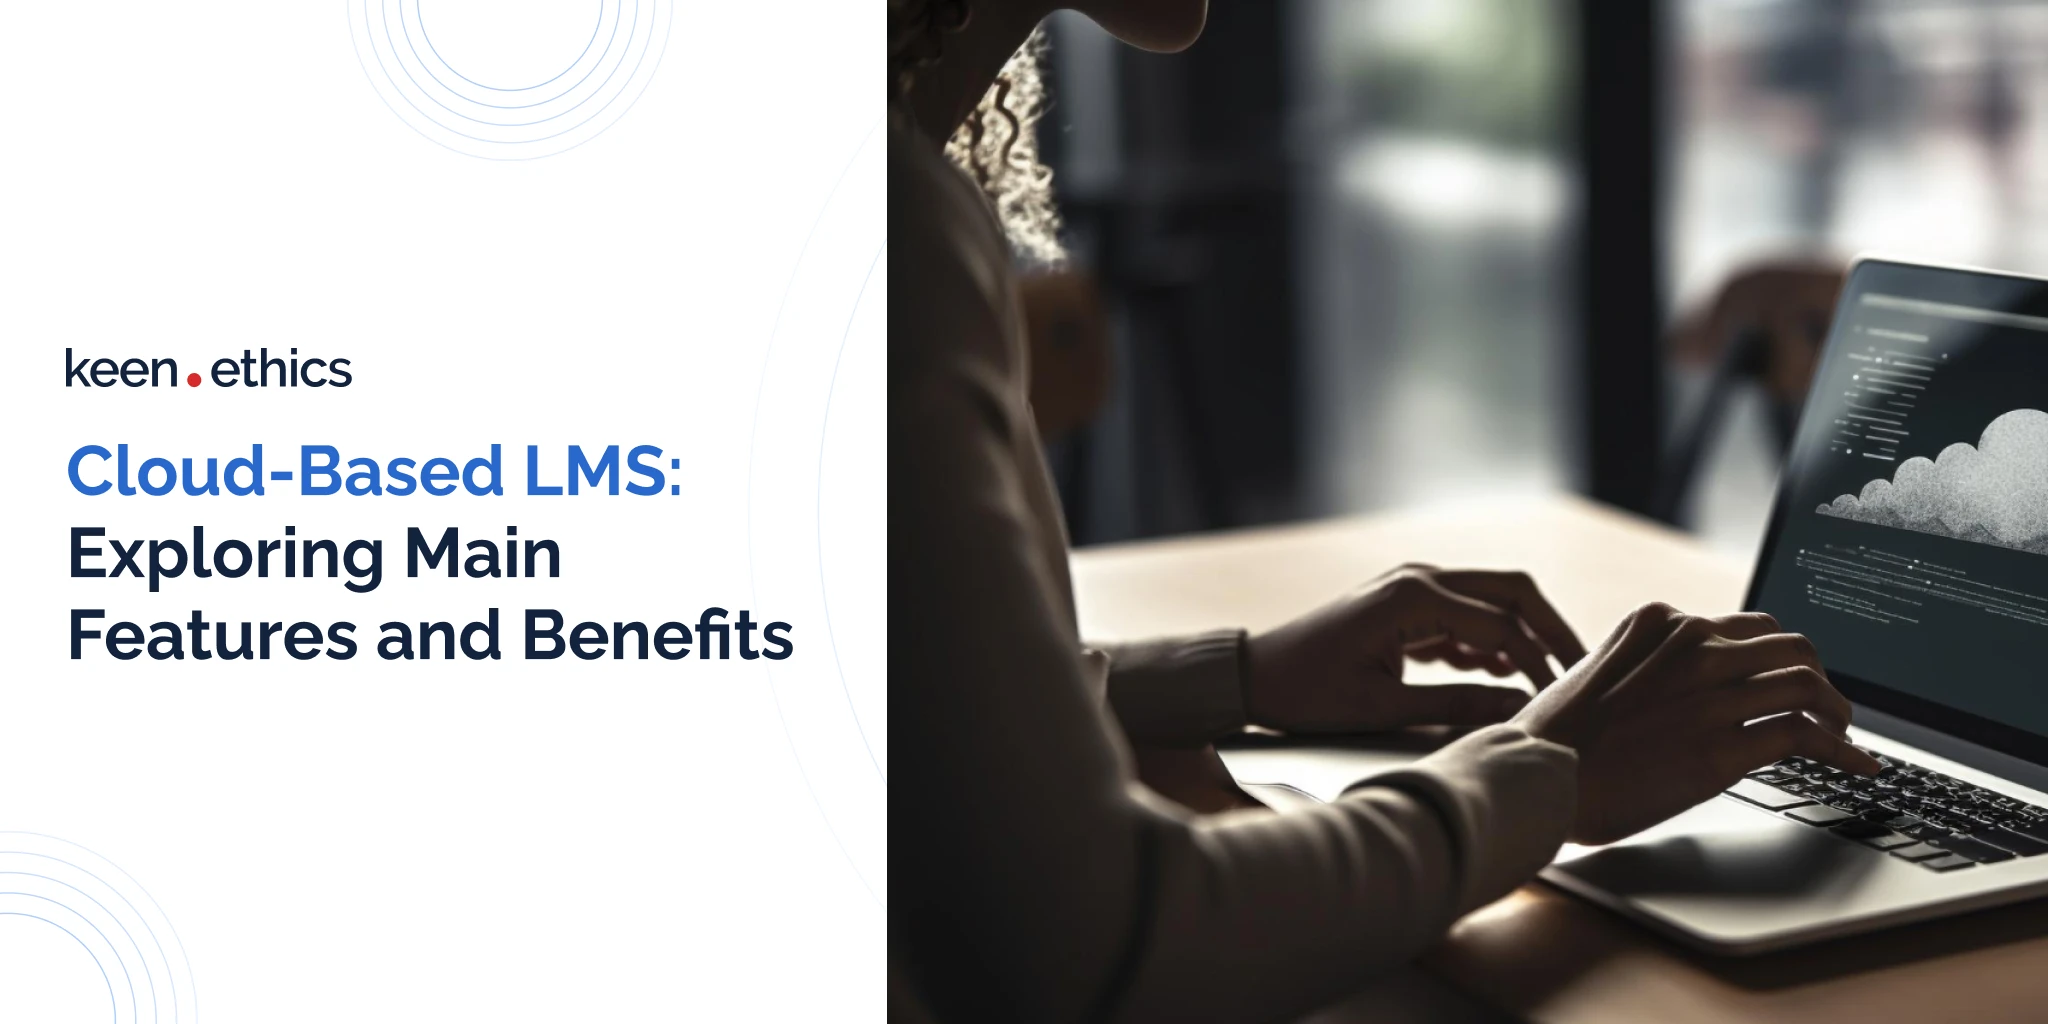 Cloud-based LMS: Exploring main features and benefits